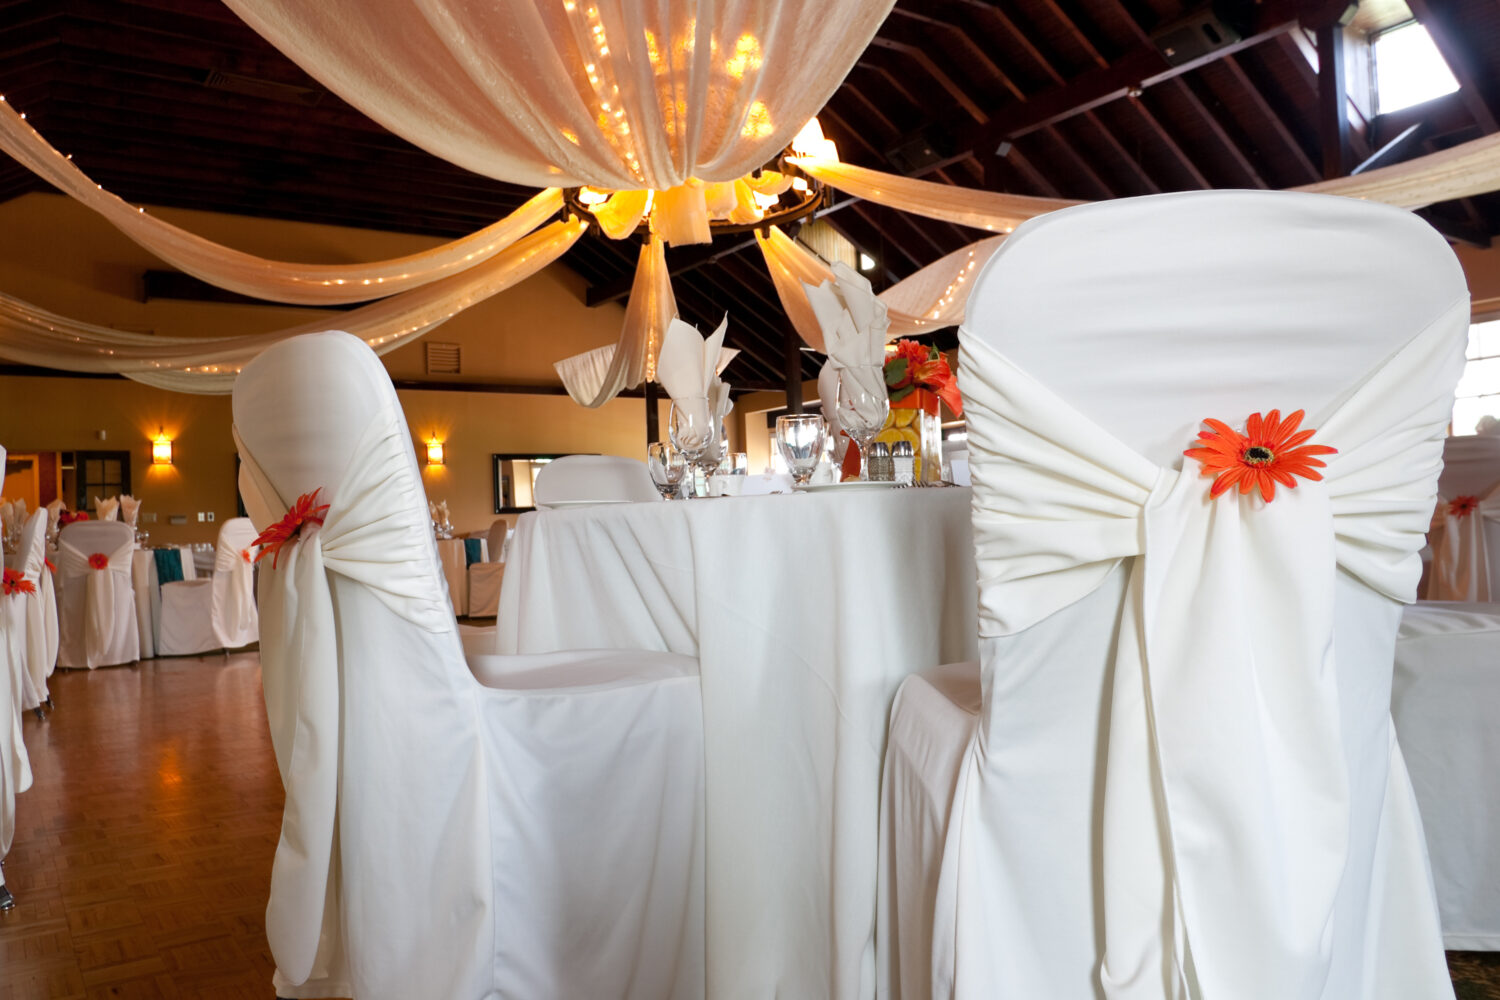 wideangle of a wedding venue focus on a single table with white covered chairs